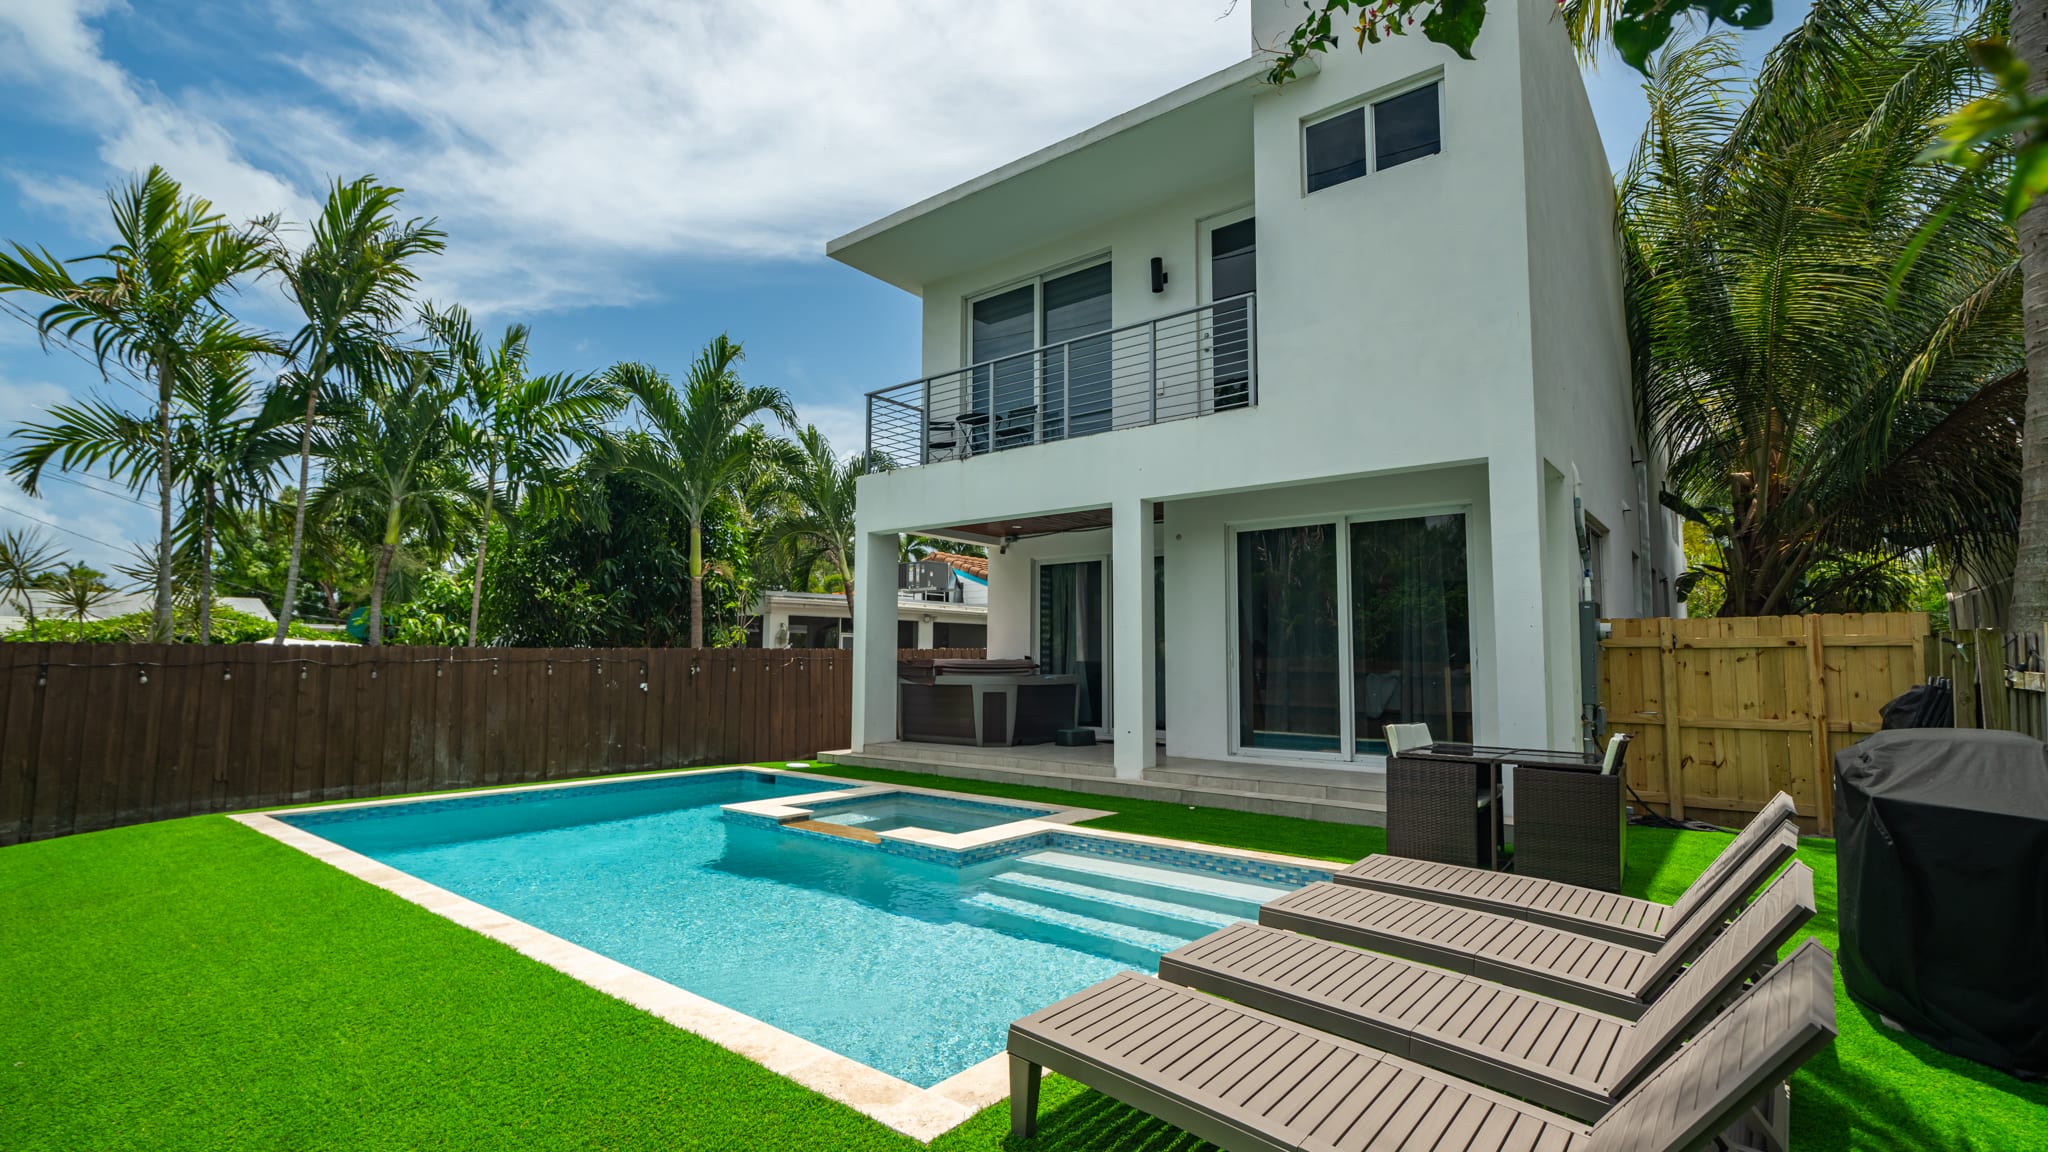 Property Image 2 - 2020 Built Modern Luxe Home Heated Pool & Jacuzzi